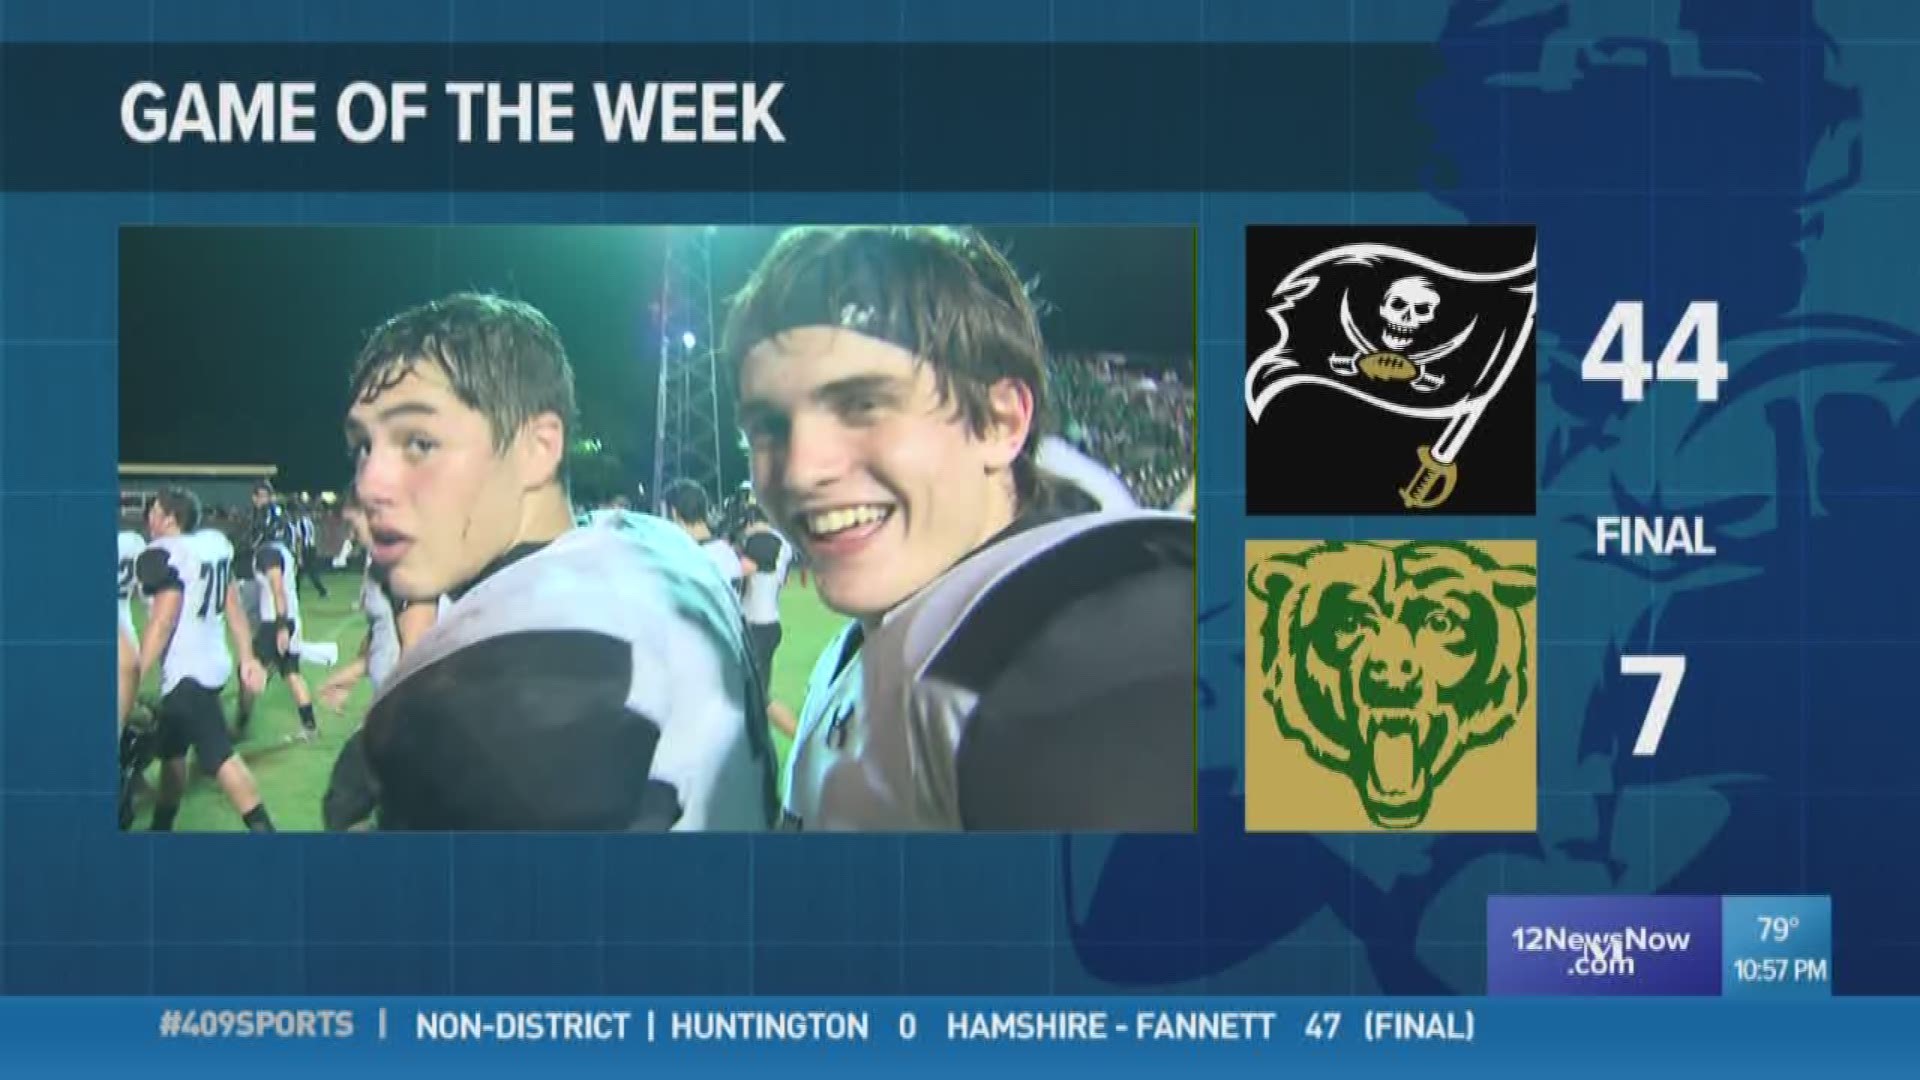 WEEK 4: More 409Sports Game of the Week highlights with Vidor taking down LC-M 44 - 7